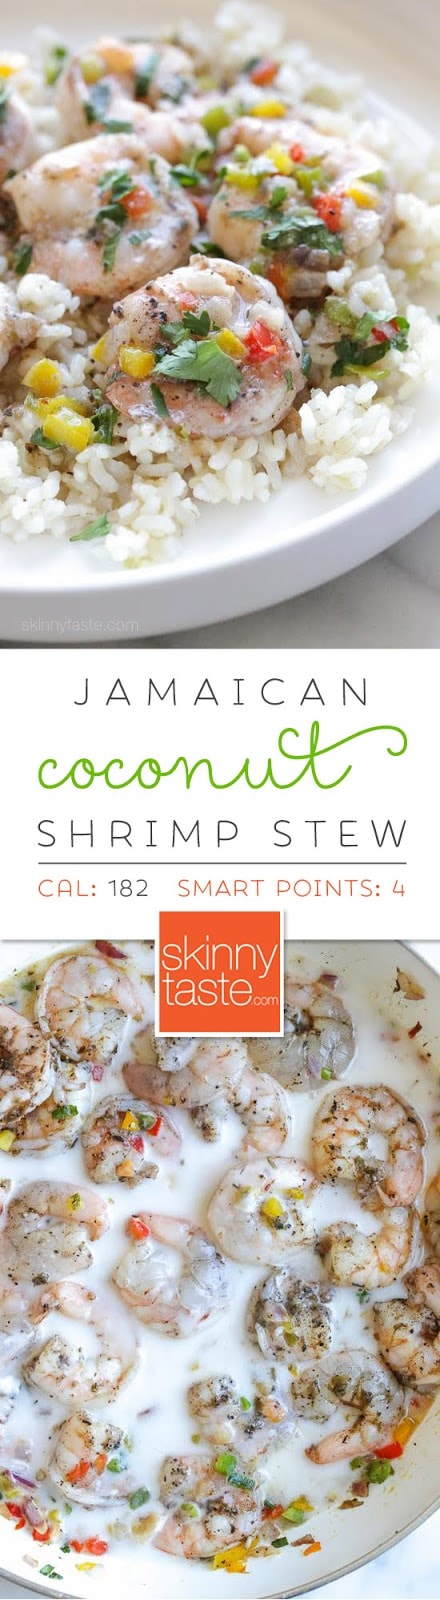 Jamaican Coconut Shrimp Stew – a quick, light and spicy shrimp dish simmered in coconut milk. Smart Points: 4 Calories: 182